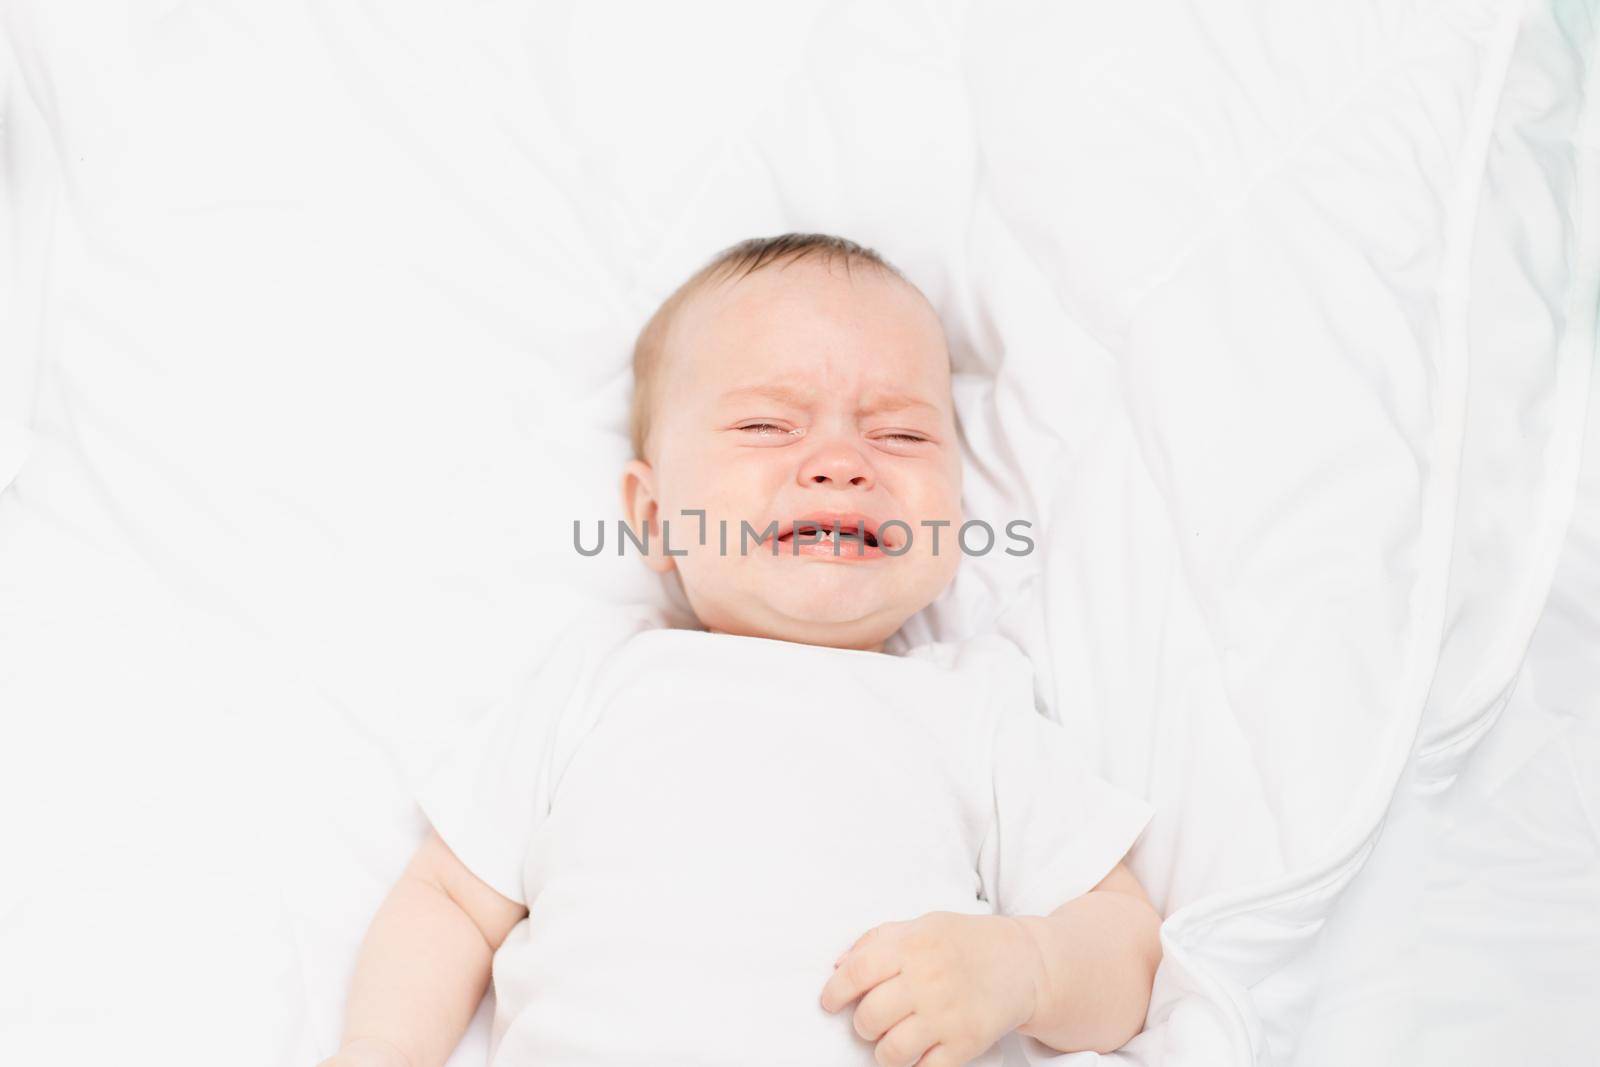 The baby is crying in his crib . The baby 's teeth are teething . Colic in babies . Hungry baby . Baby on a white background